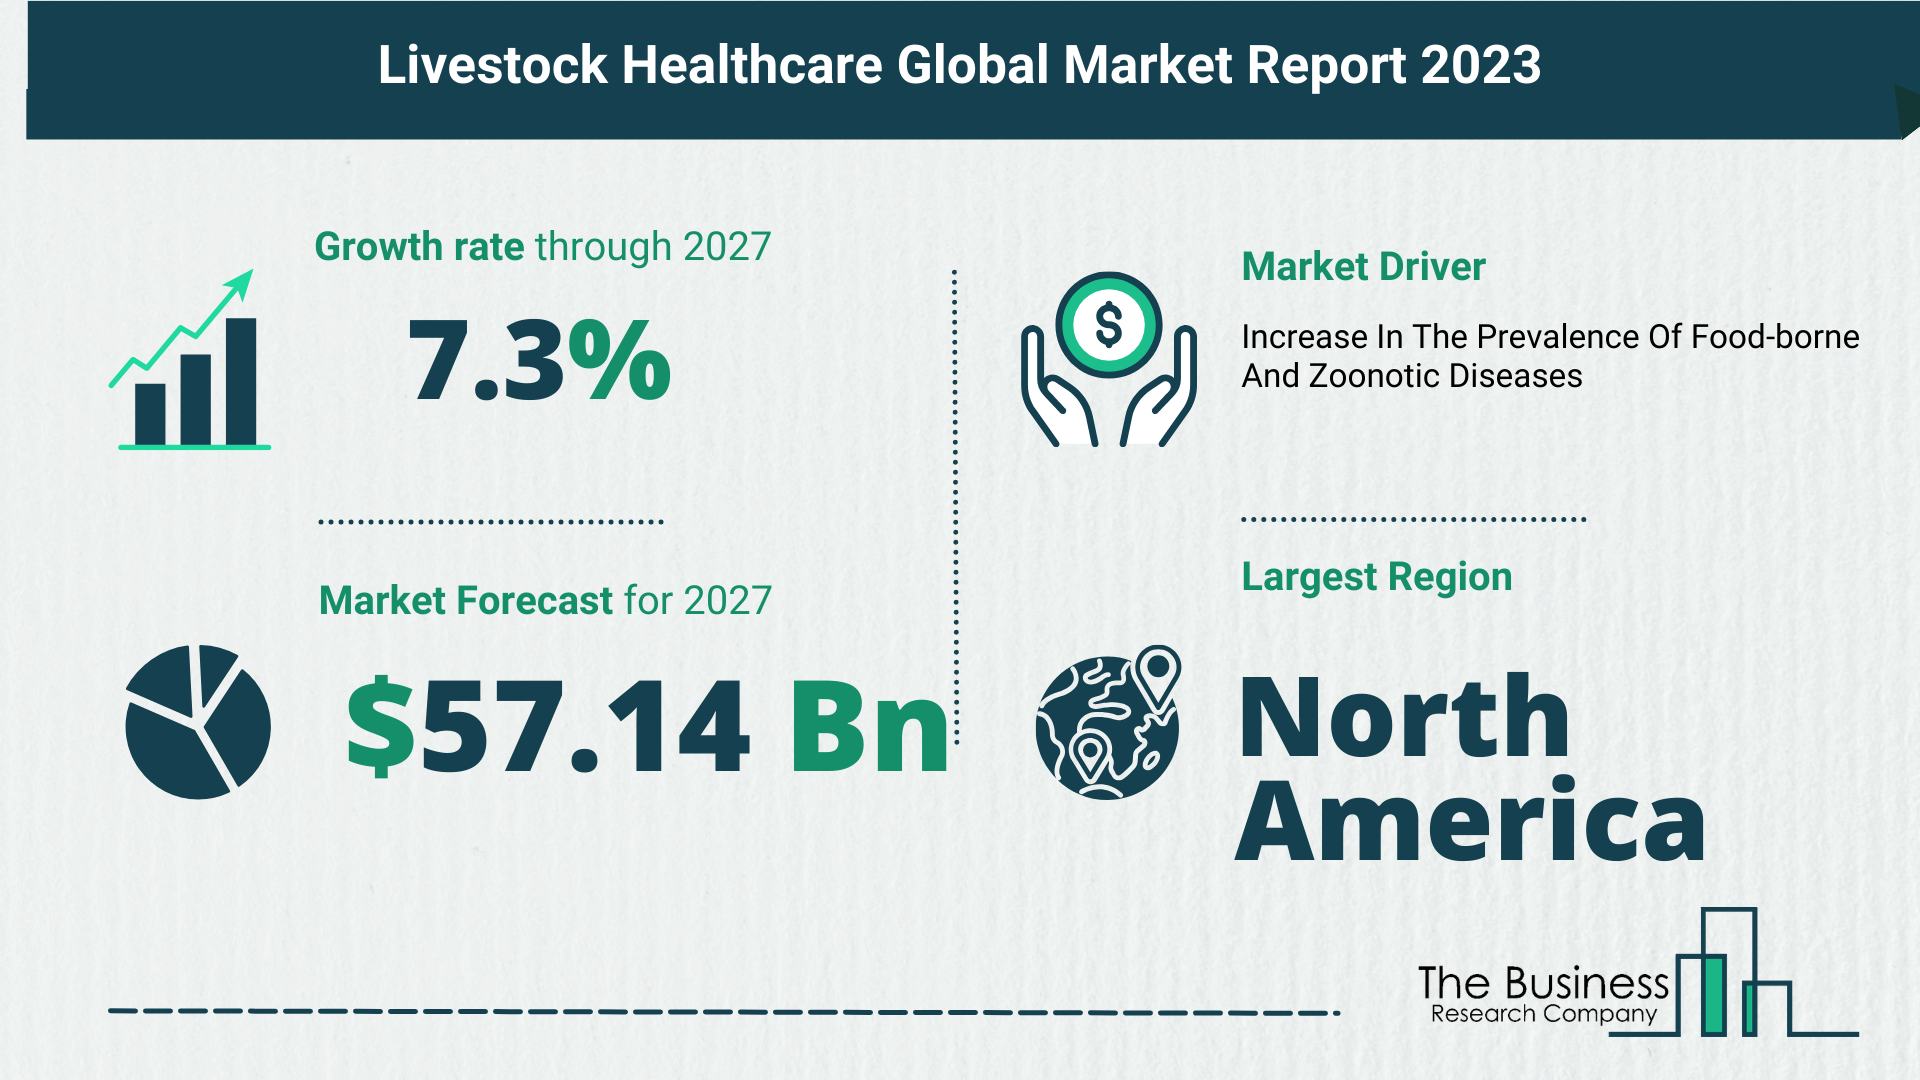 Key Insights On The Livestock Healthcare Market 2023 – Size, Driver, And Major Players